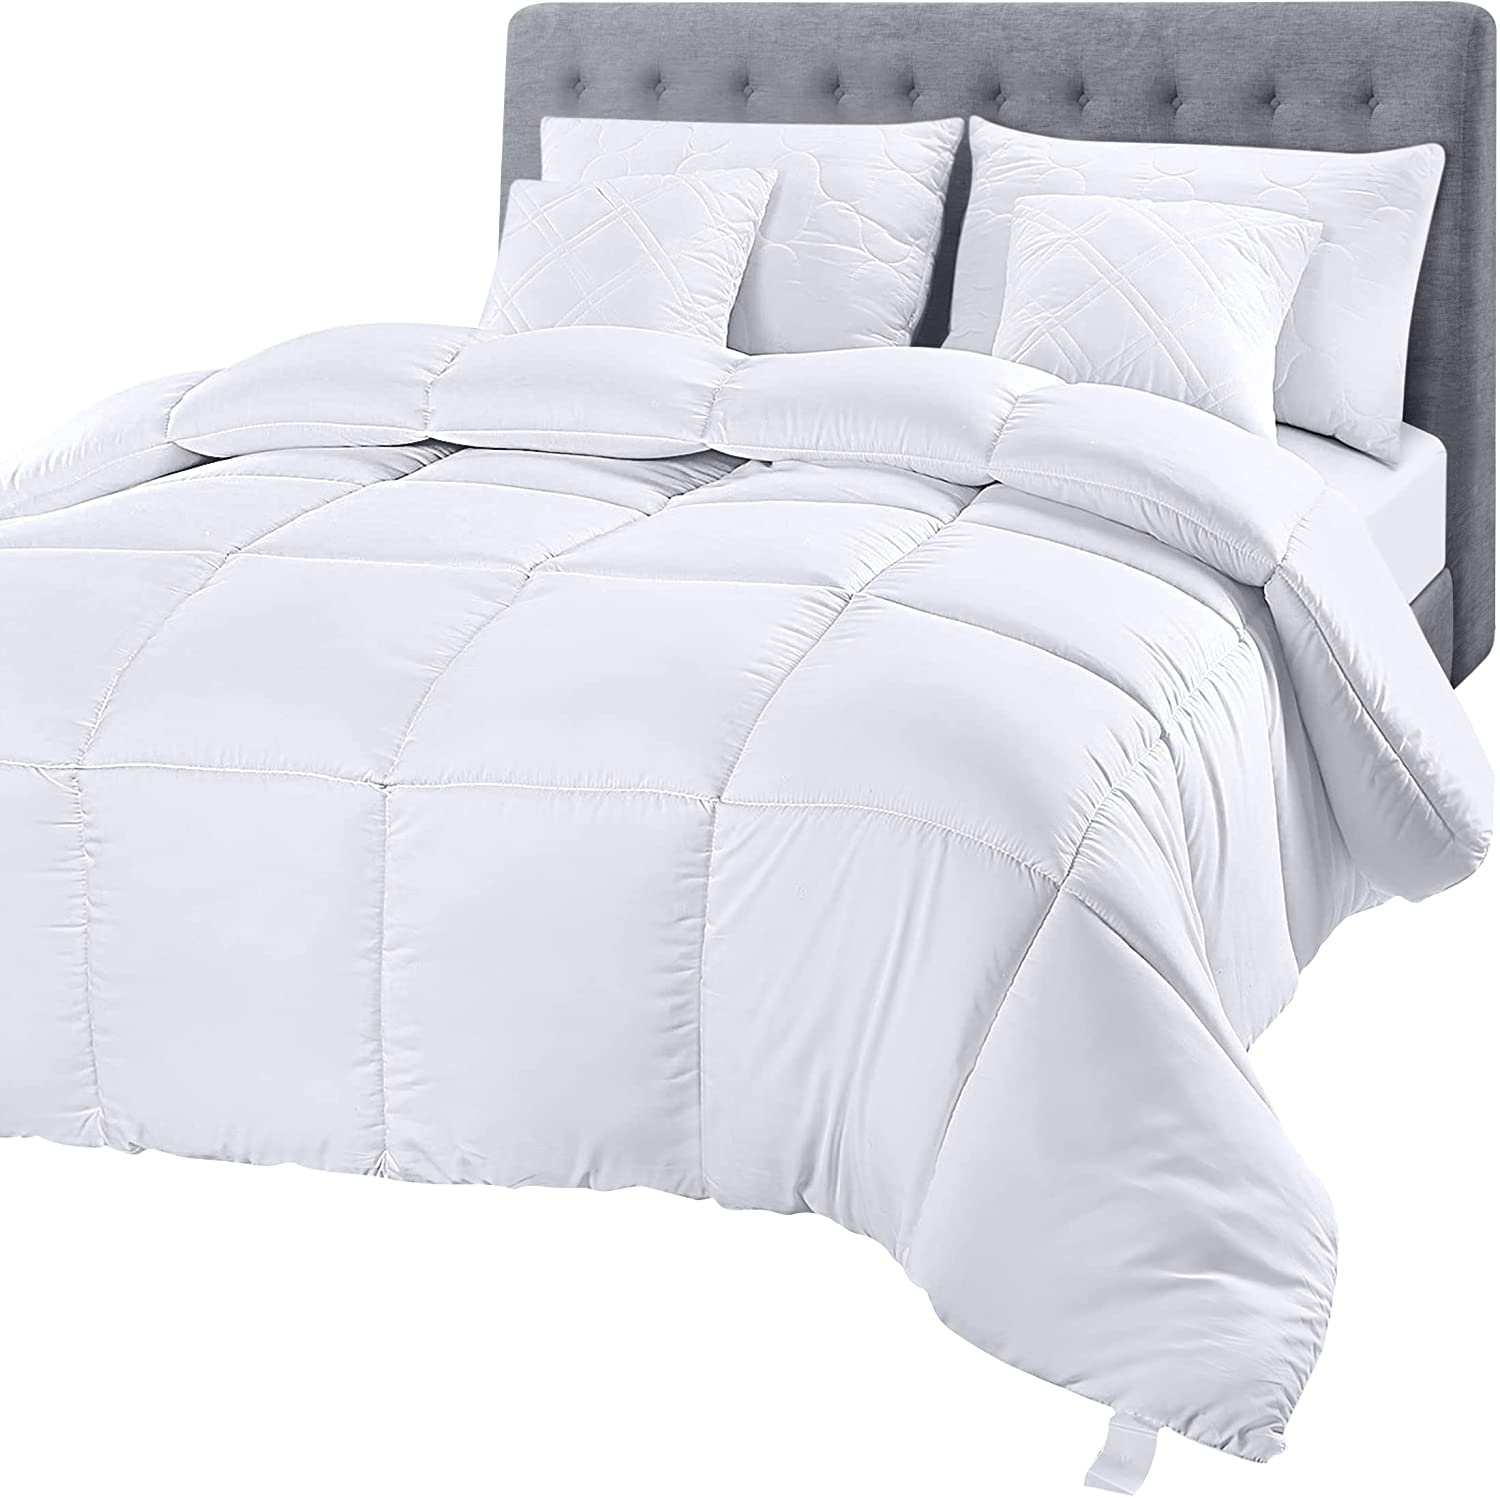 Utopia Bedding Queen Duvet Cover Set On Sale - A Thrifty Mom